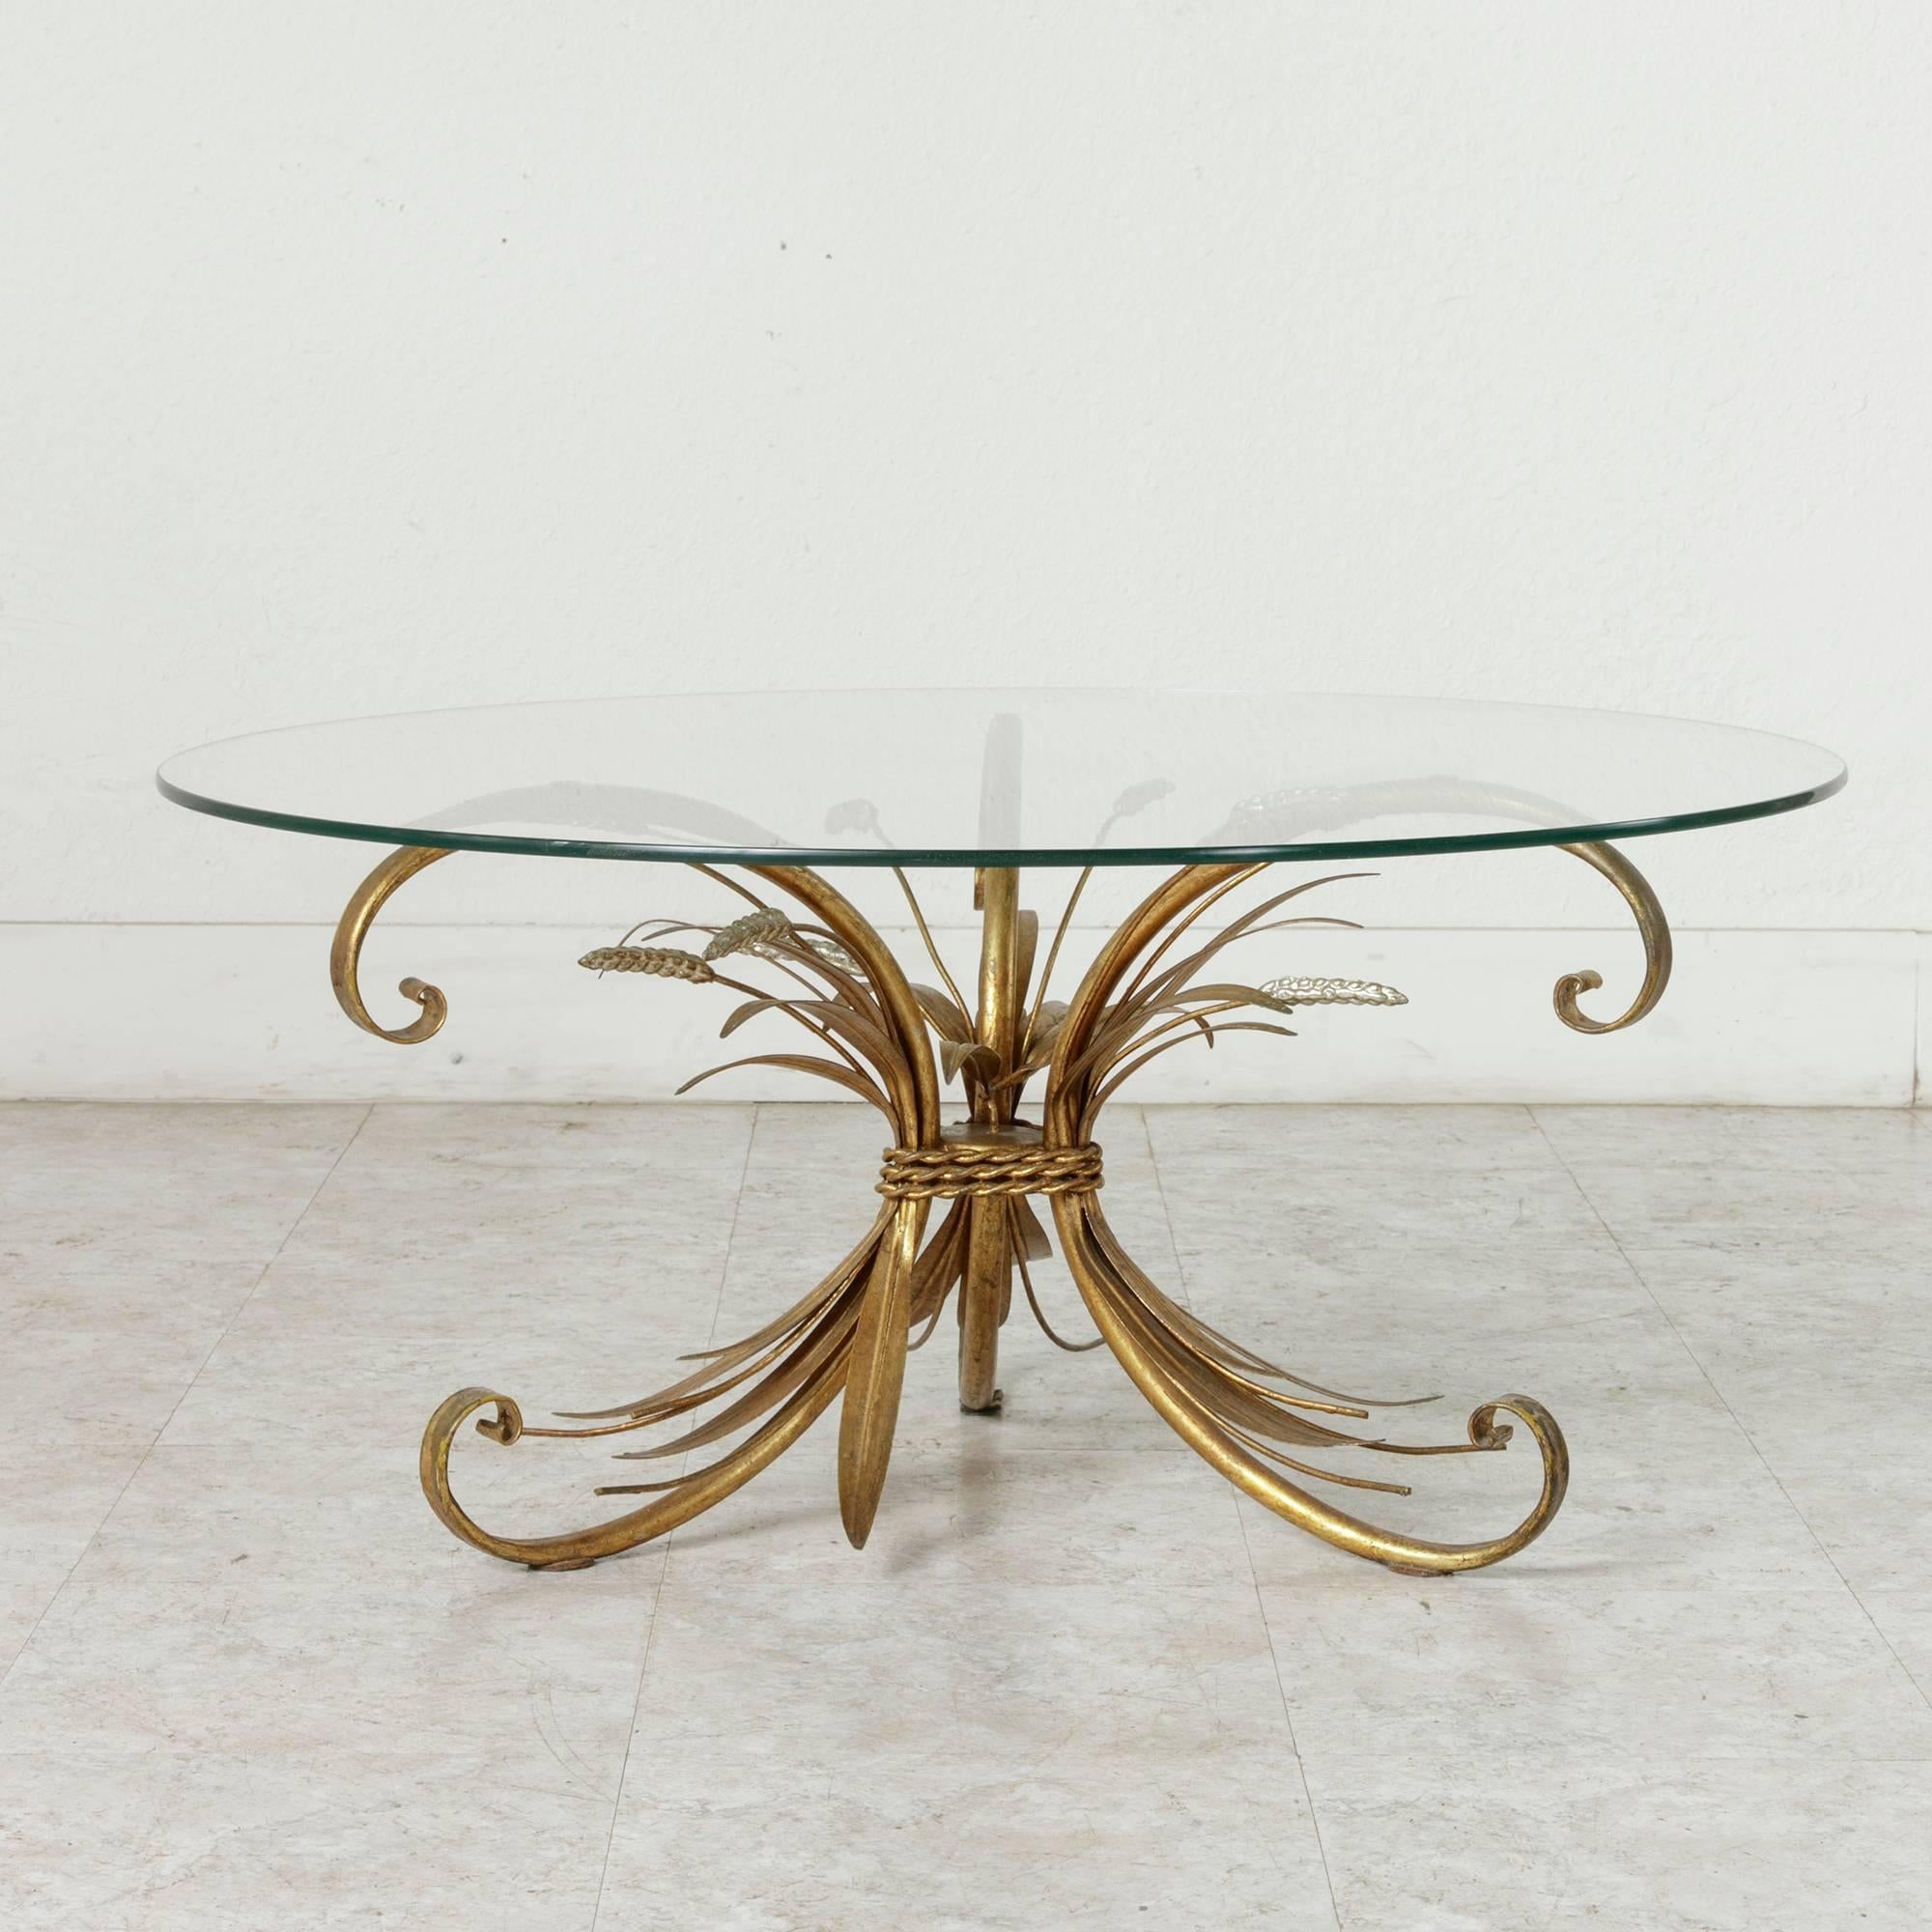 20th Century Mid-Century Gilt and Silvered Metal Coco Chanel Coffee Table in Maison Baguès